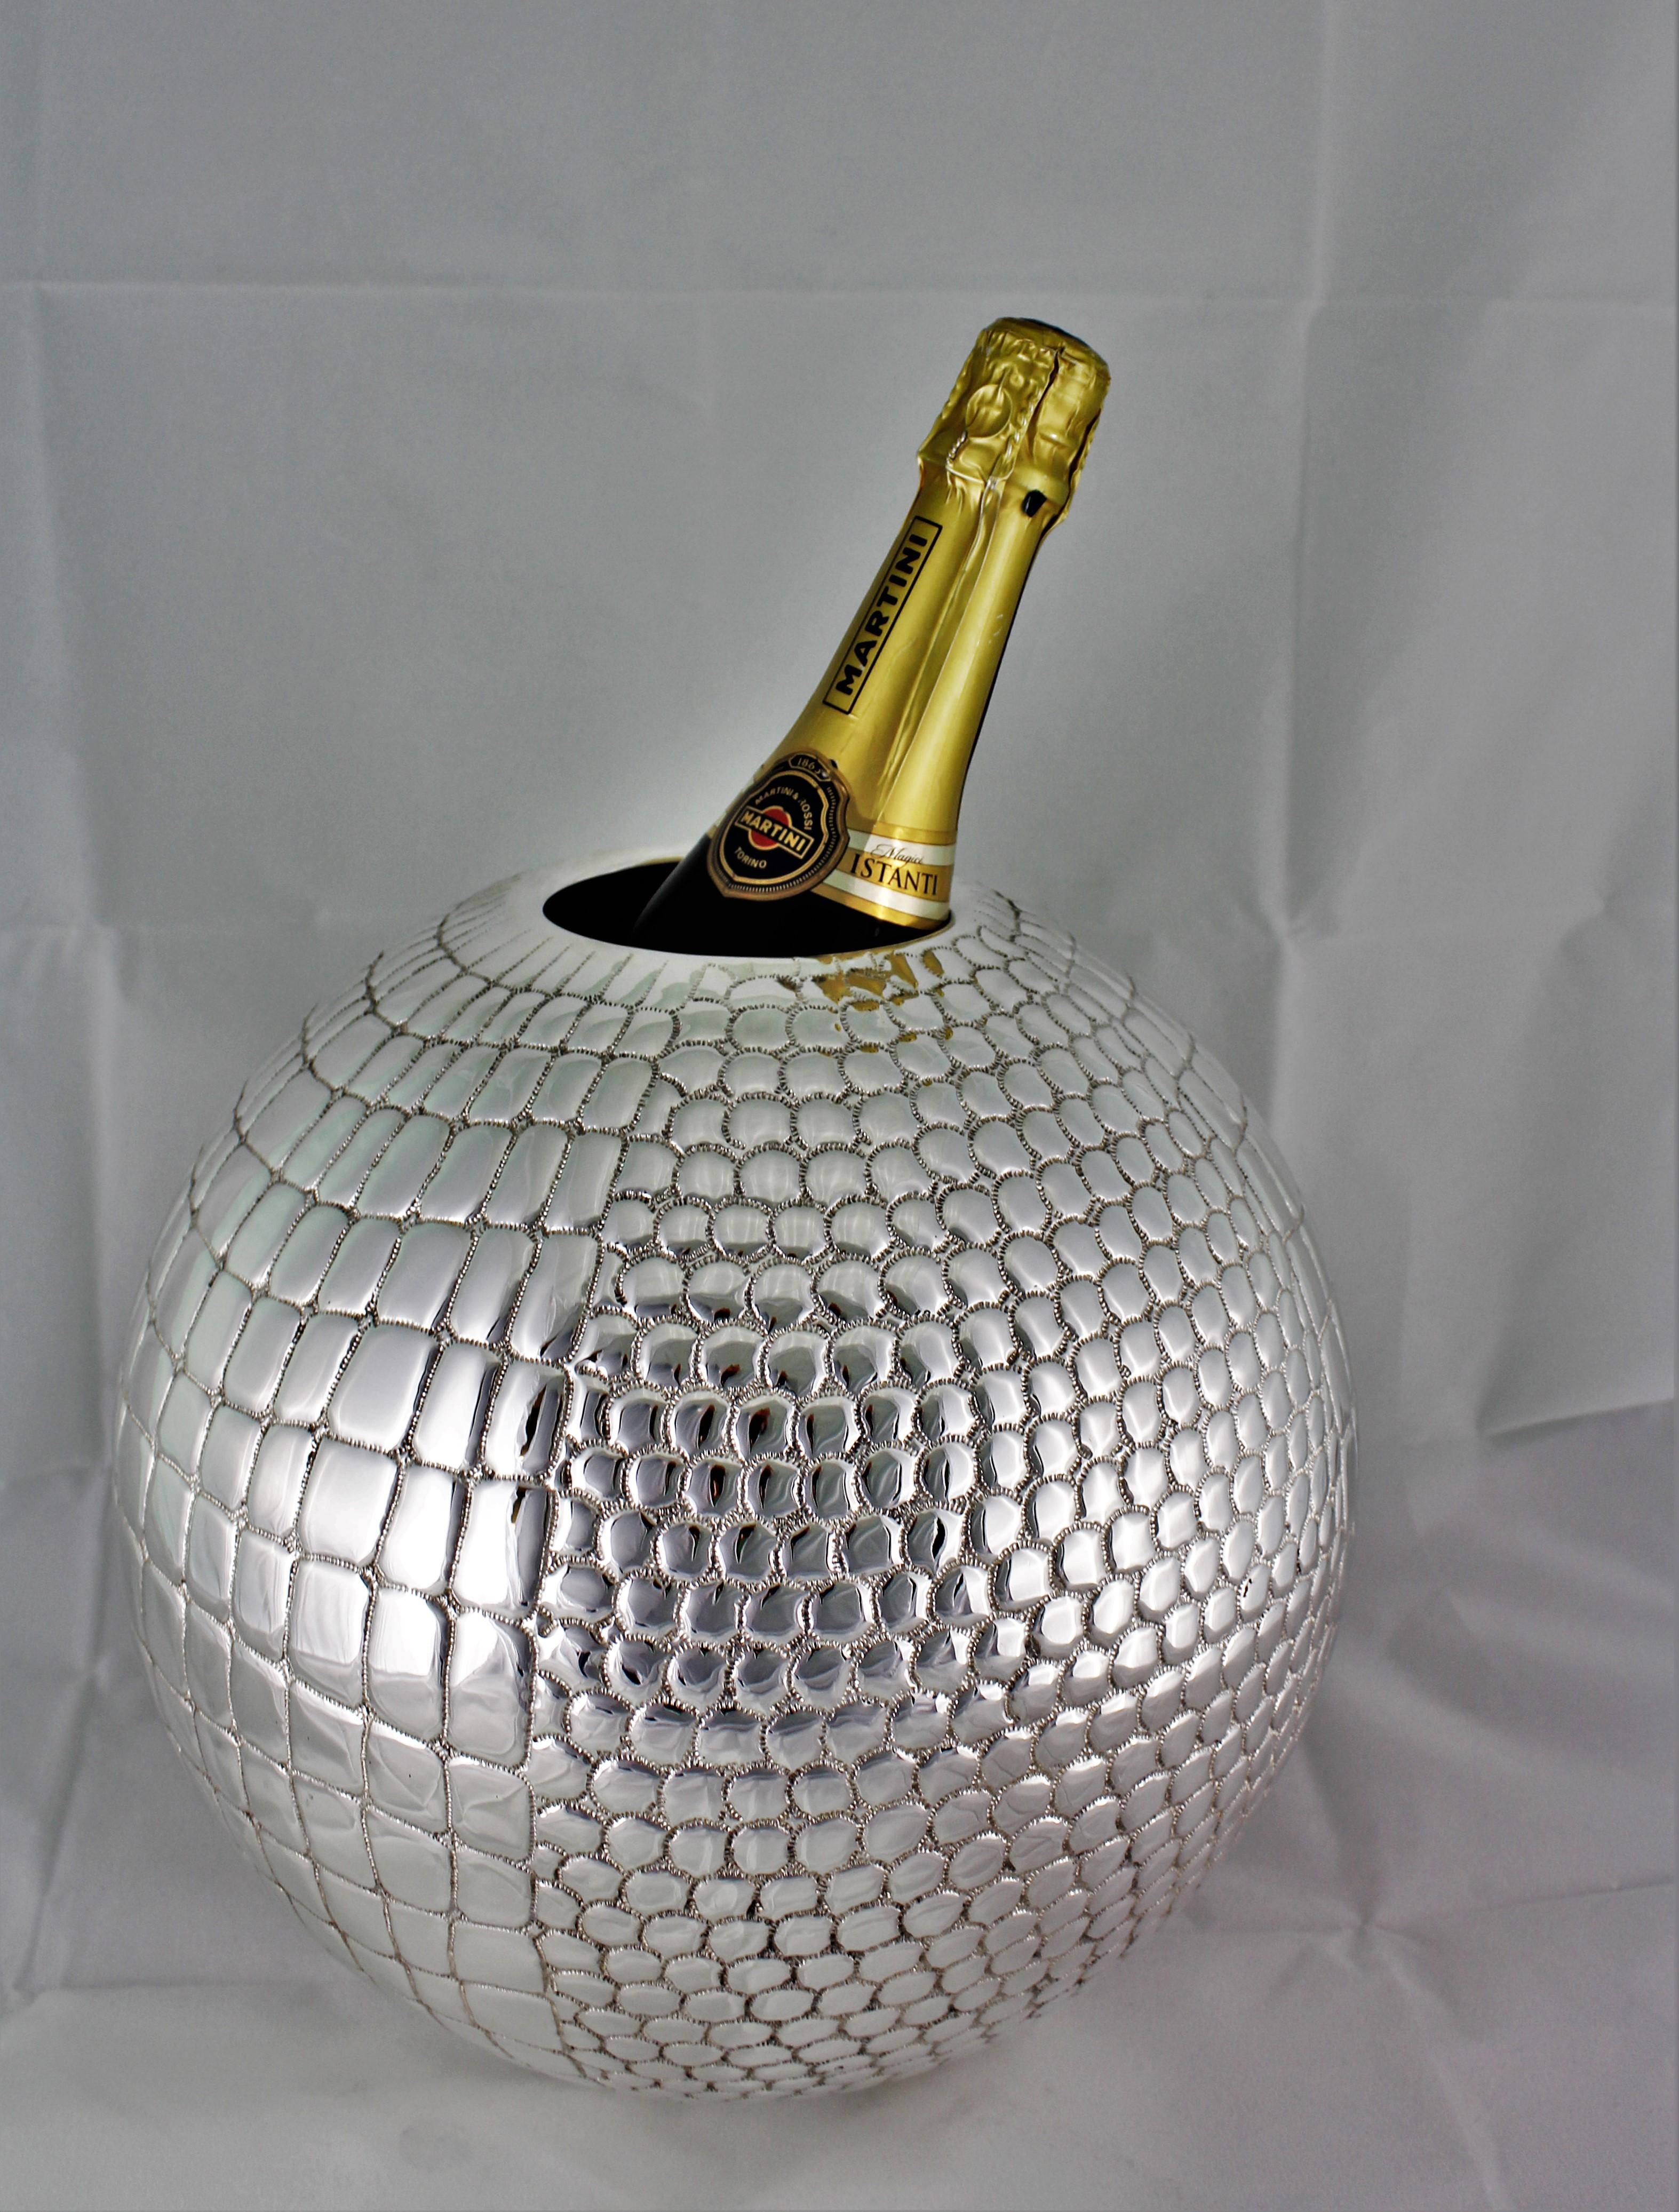 Splendid large engraved silver wine cooler/ flower vase. 

Globe shaped and chiseled crocodile like skin motif.

Can be used as astonishing wine cooler or magnificent flower vase. 

Realized, circa 1950s by the master silversmith Paolo Scavia